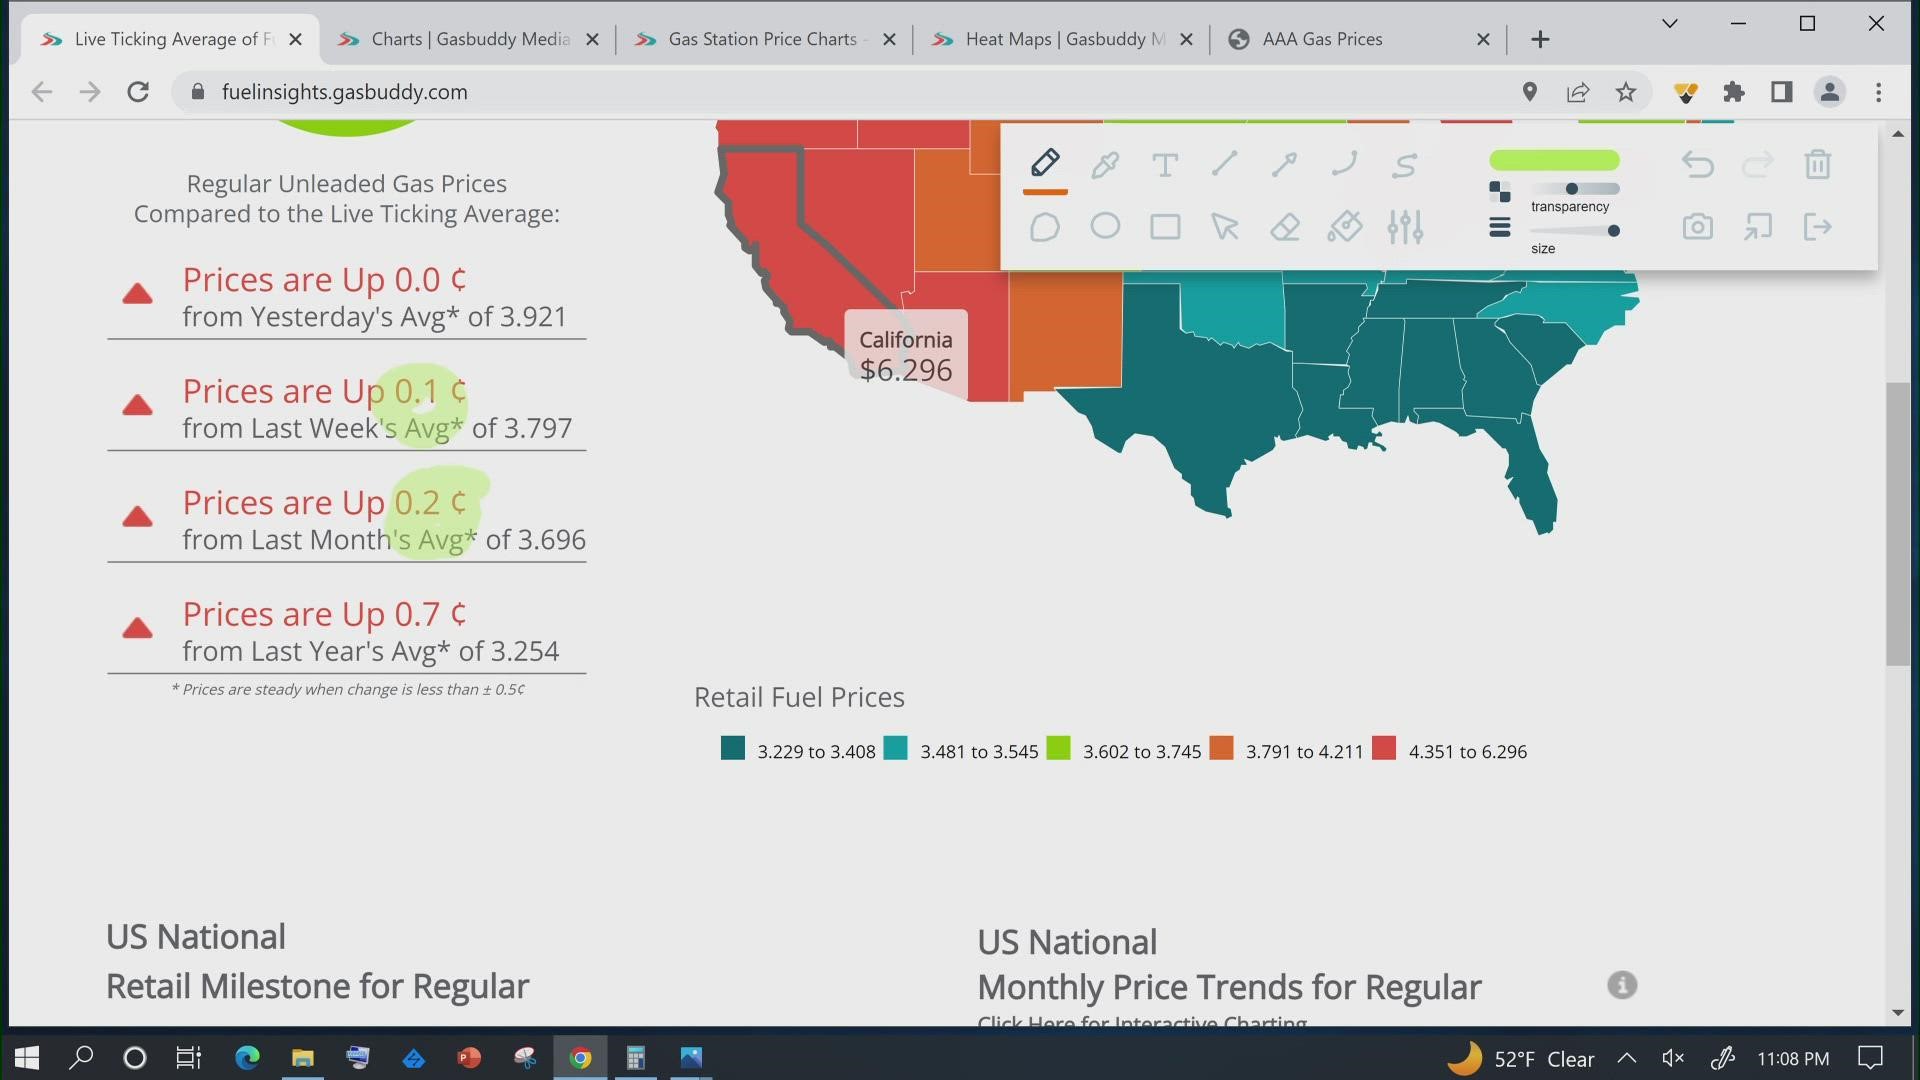 Prices are up nationally 20 cents over last month.